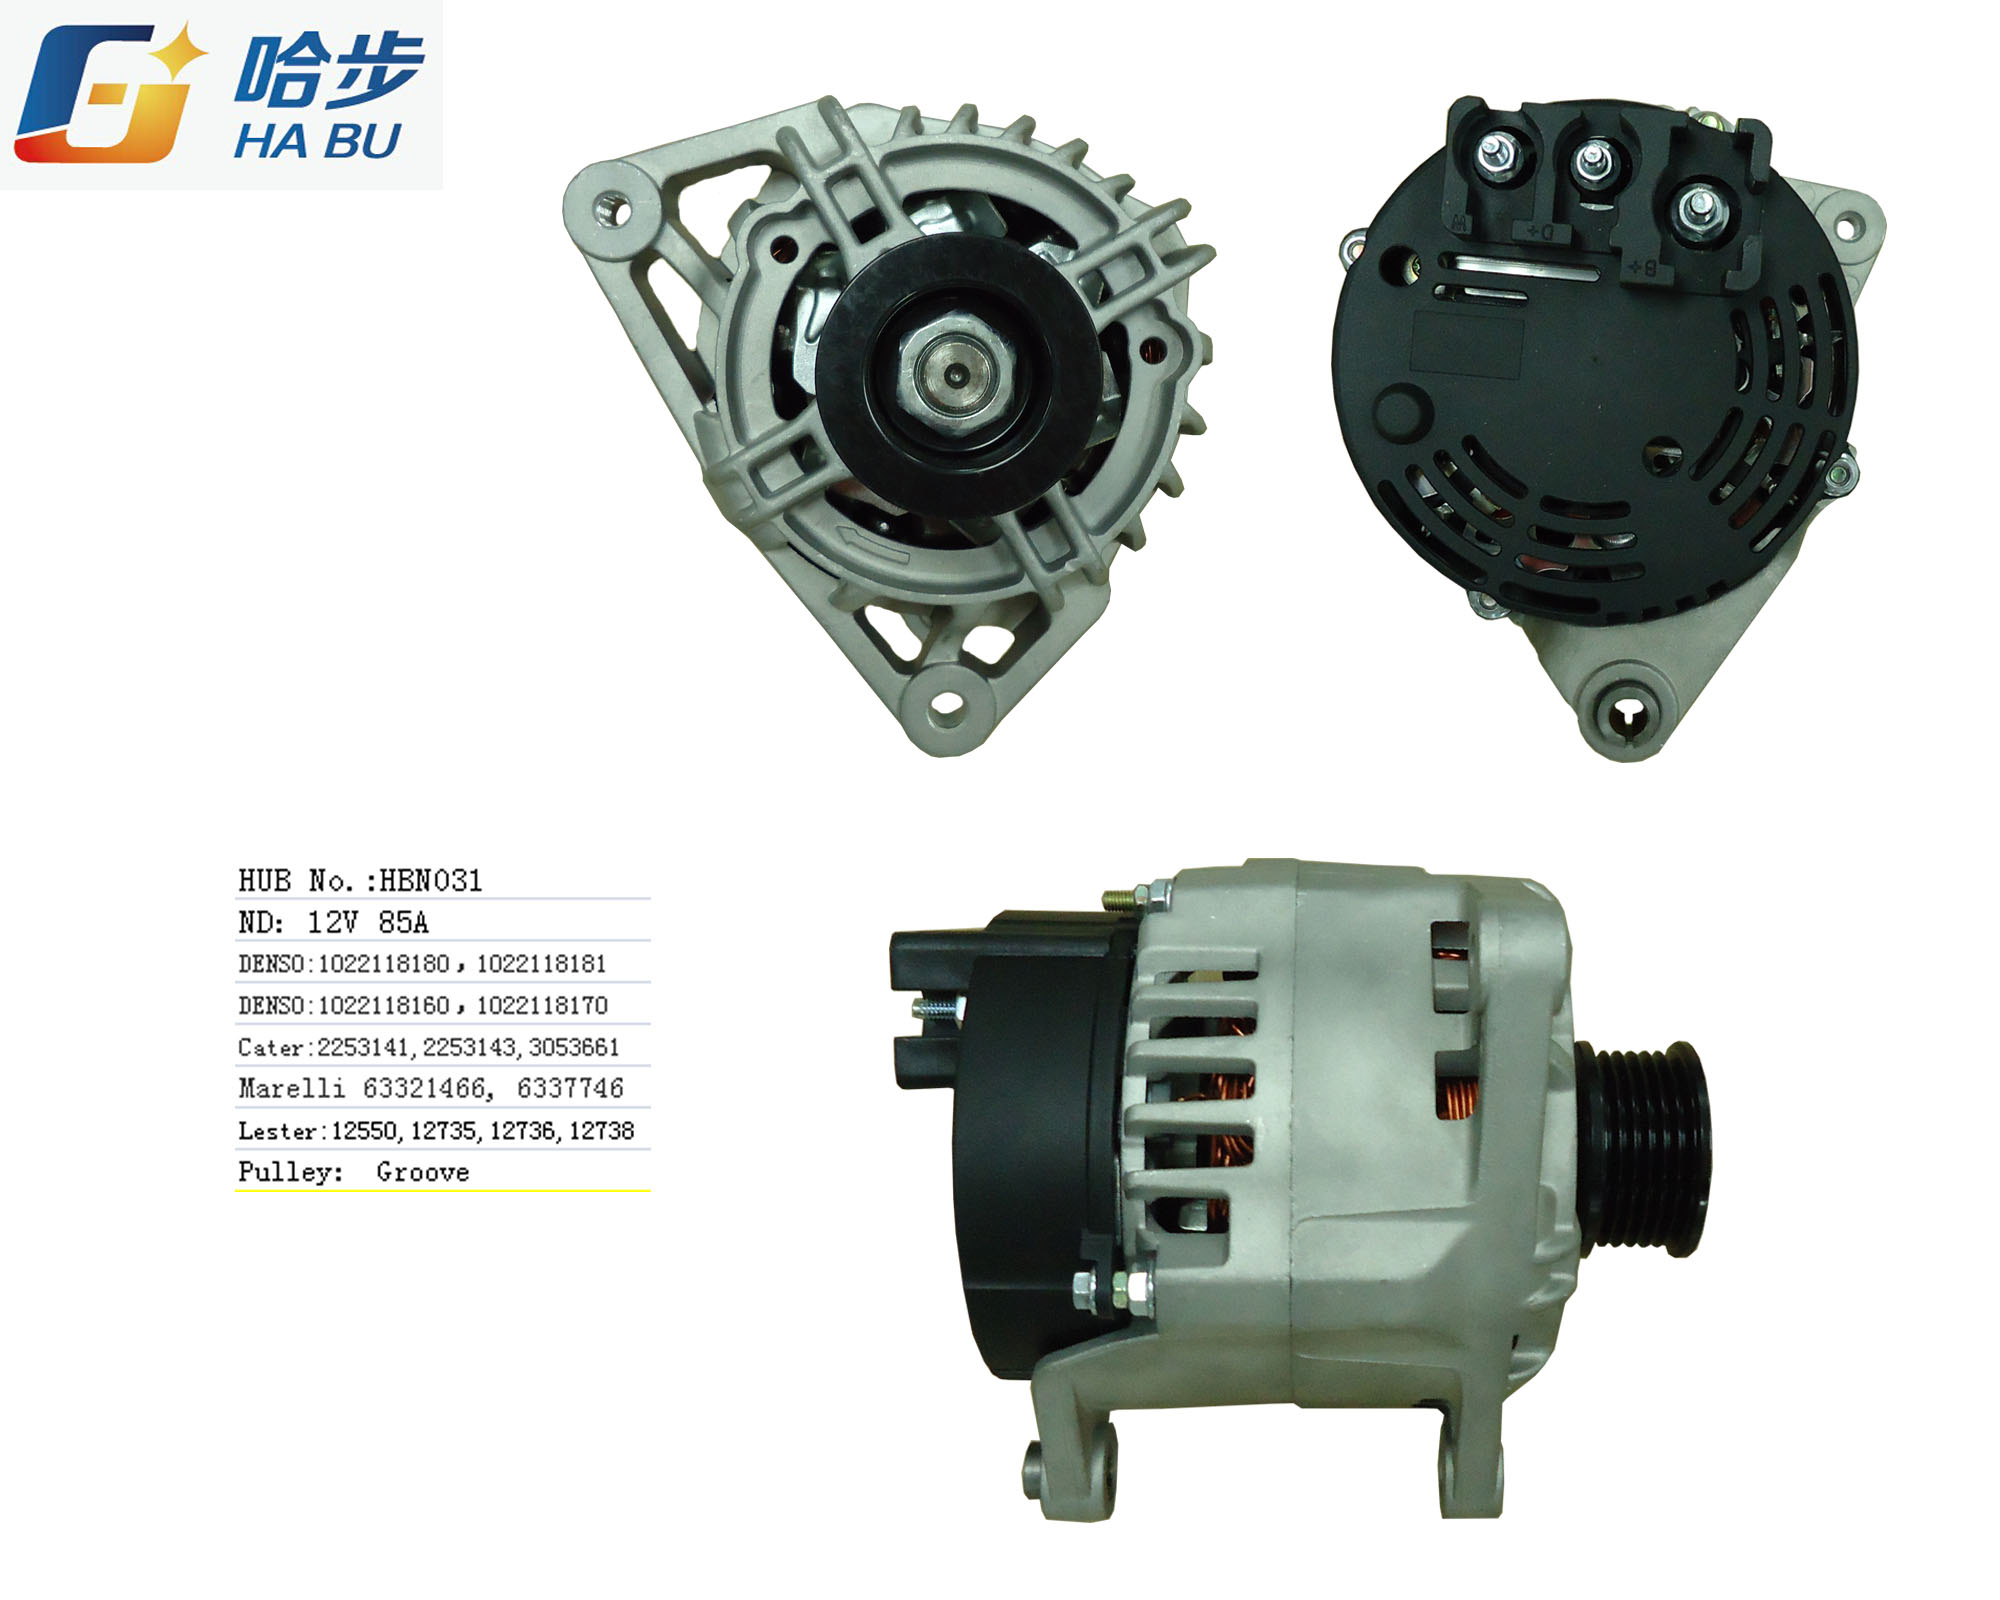 New Alternator Fits Perkins Engine 24481 63377462 Man7462 1022118180 185046522 Landrover Discovery III 2700 2004-09 Lester 24028 104210-3710 Yle500200